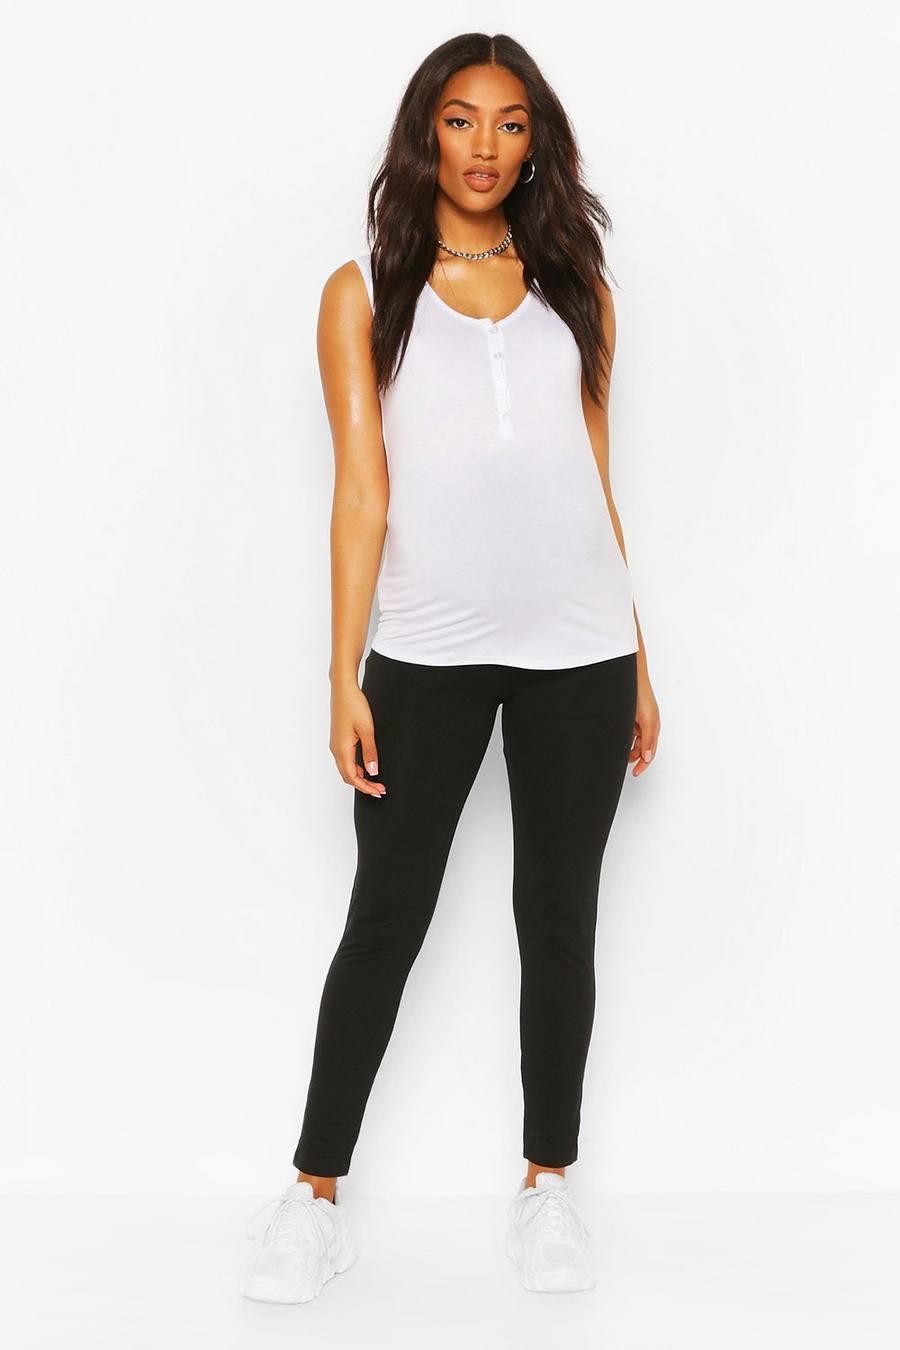 Maternity Ruched Bum Over Bump Leggings